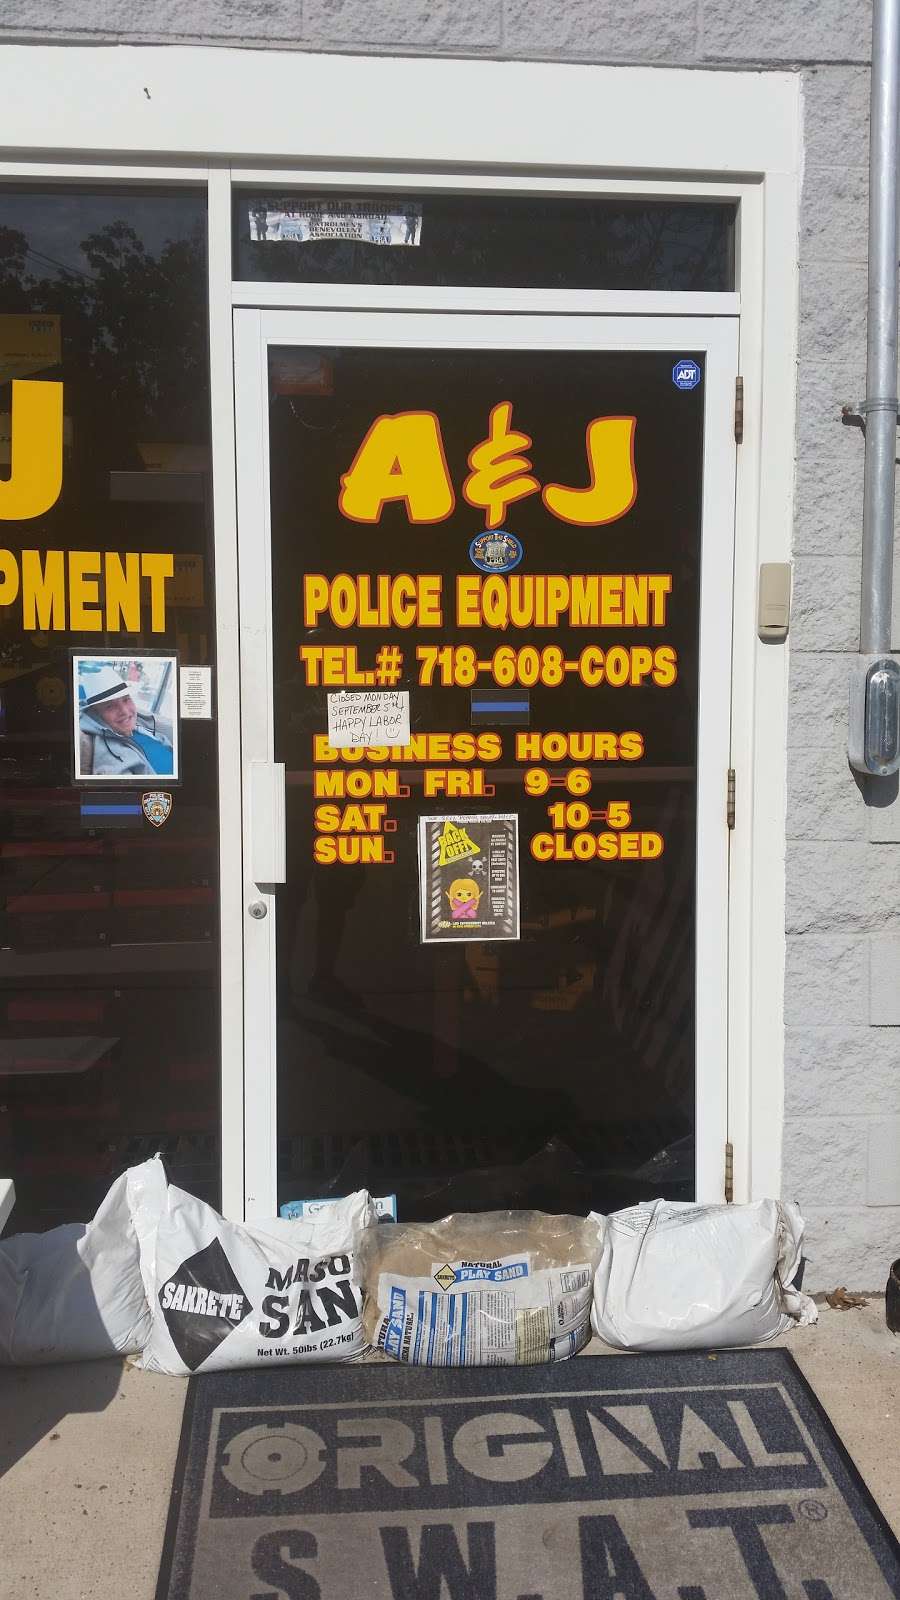 A & J Police Equipment Inc | 359 Cleveland Ave, Staten Island, NY 10308 | Phone: (718) 608-2677